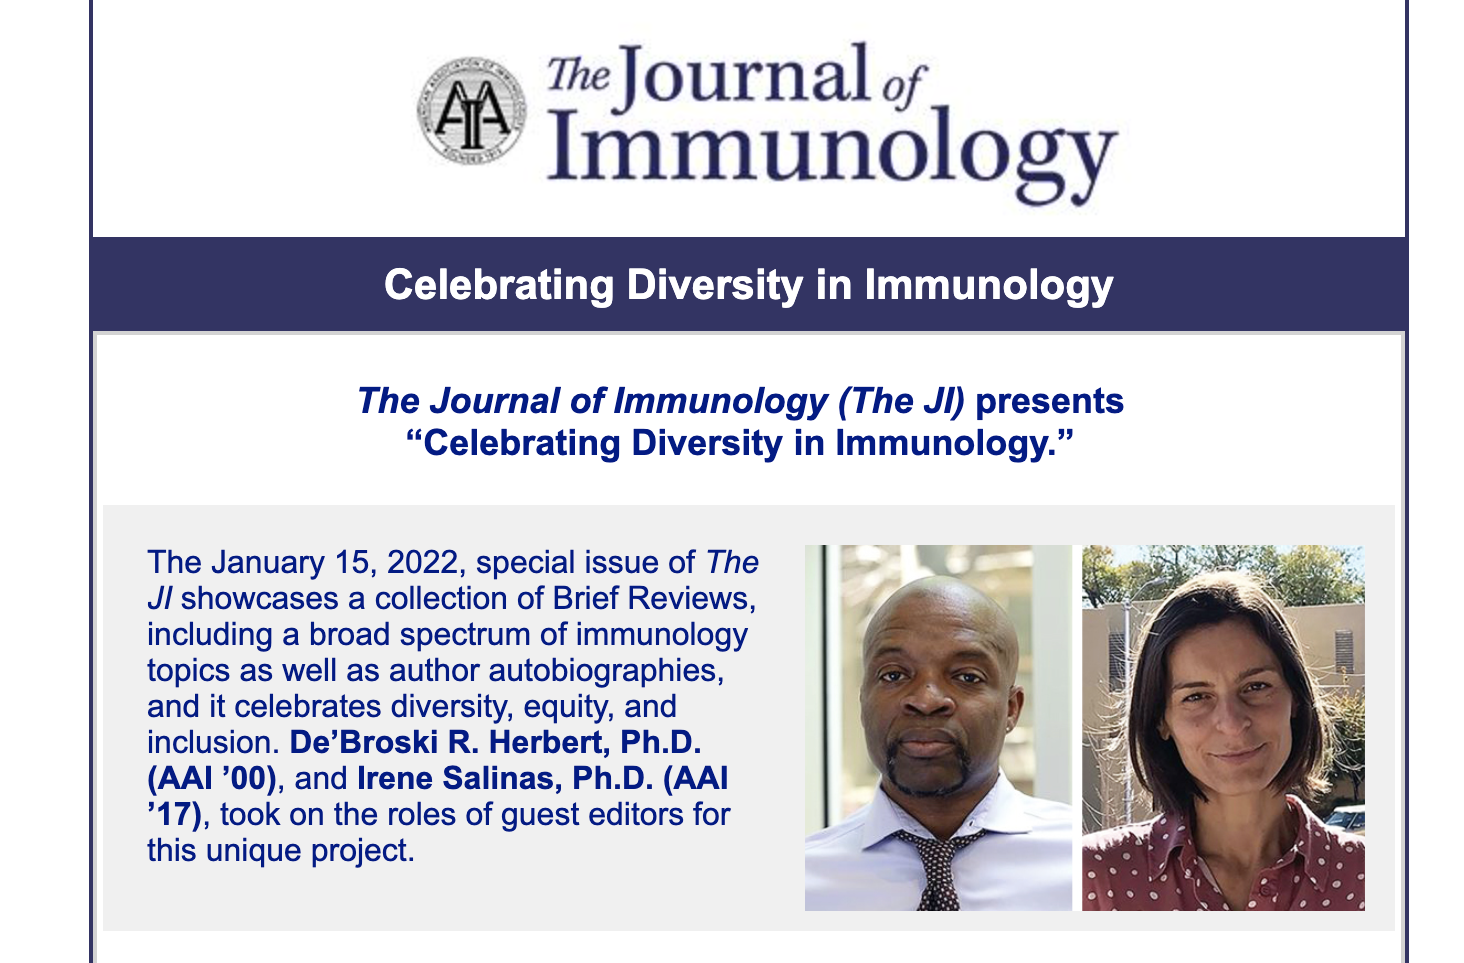 The Journal of Immunology (The JI) presents  “Celebrating Diversity in Immunology.”